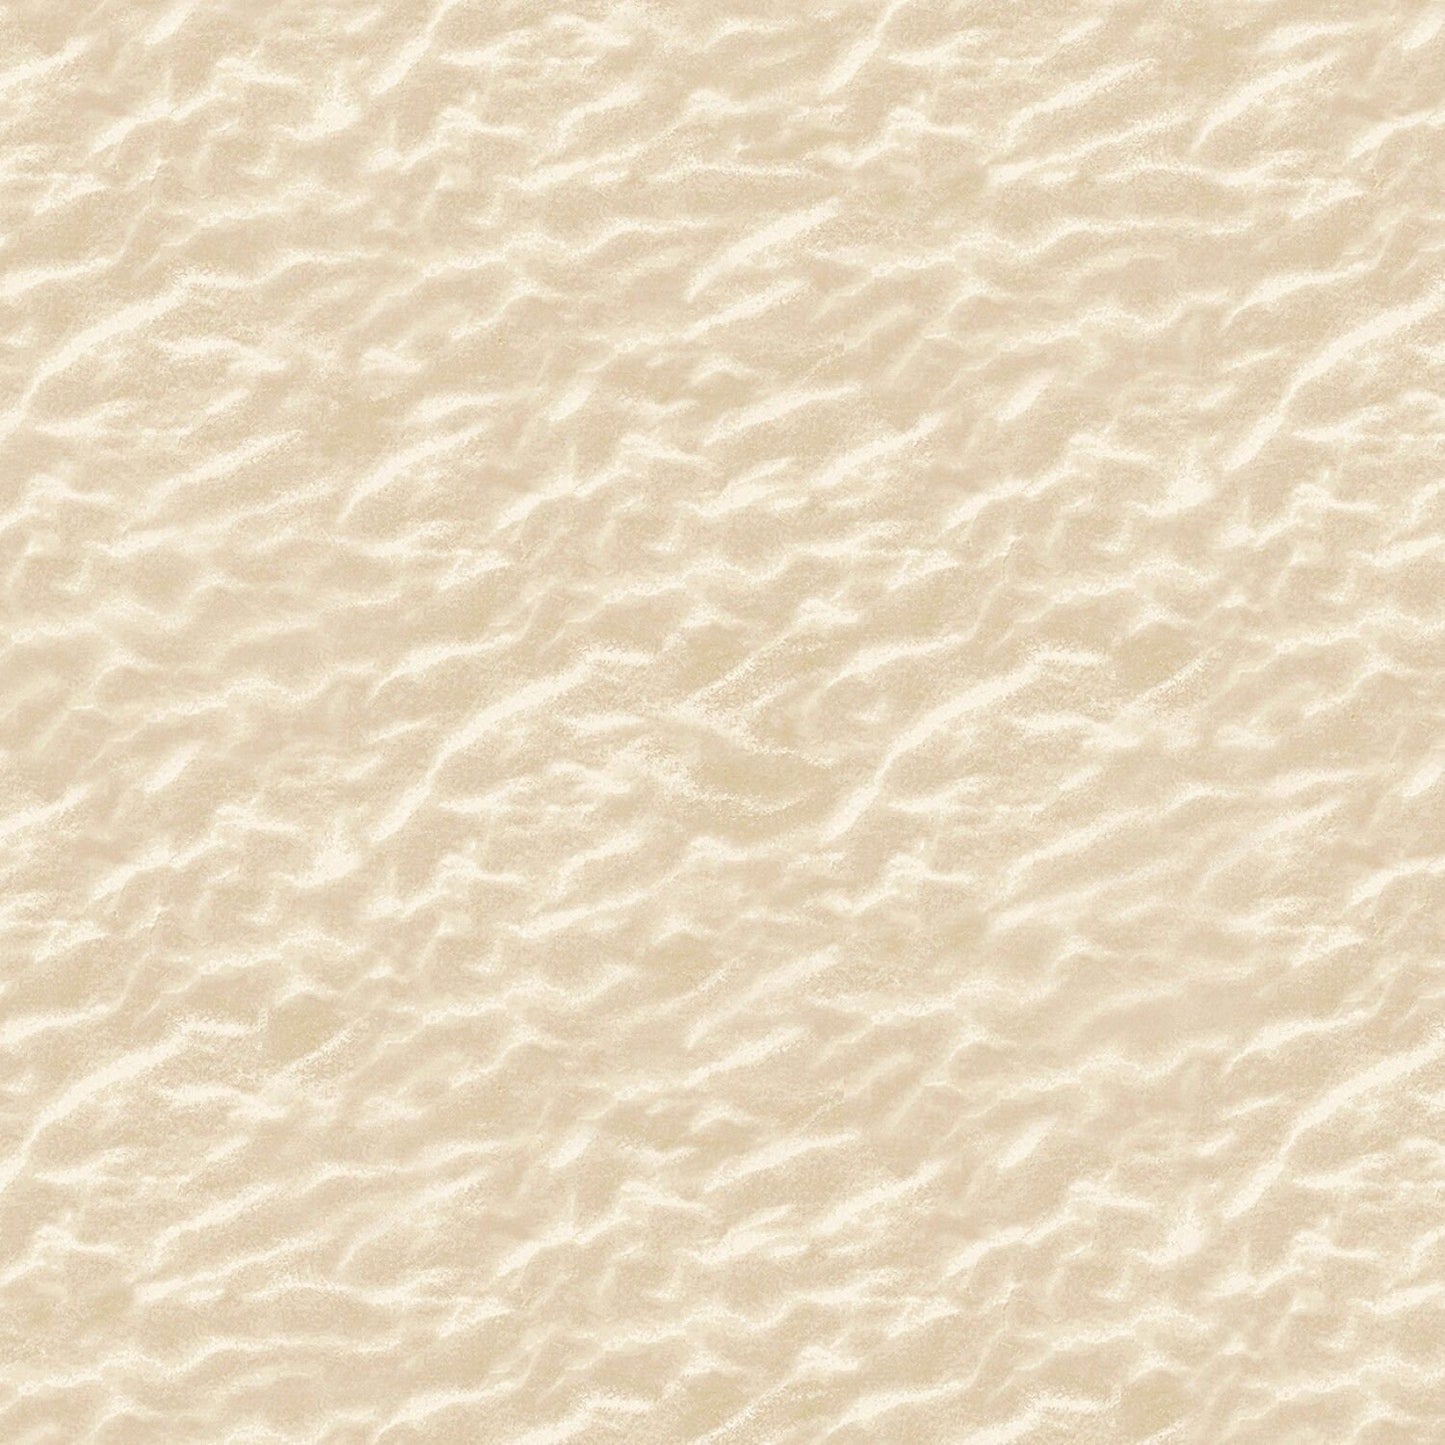 Welcome to The Beach Sand Natural C8395-NAT Cotton Woven Fabric